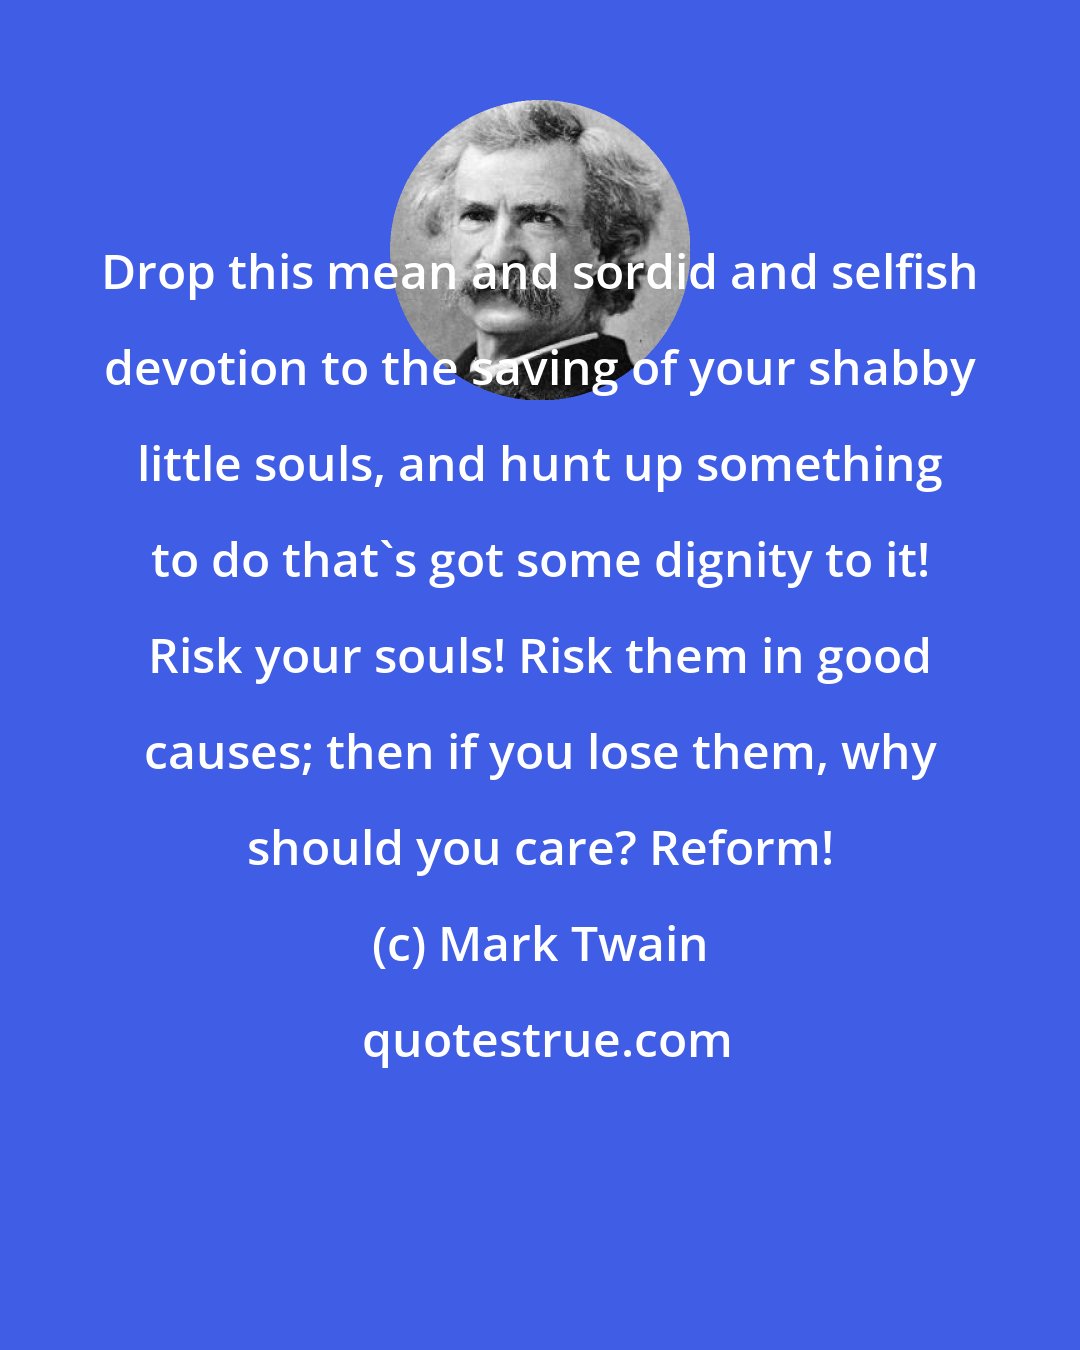 Mark Twain: Drop this mean and sordid and selfish devotion to the saving of your shabby little souls, and hunt up something to do that's got some dignity to it! Risk your souls! Risk them in good causes; then if you lose them, why should you care? Reform!